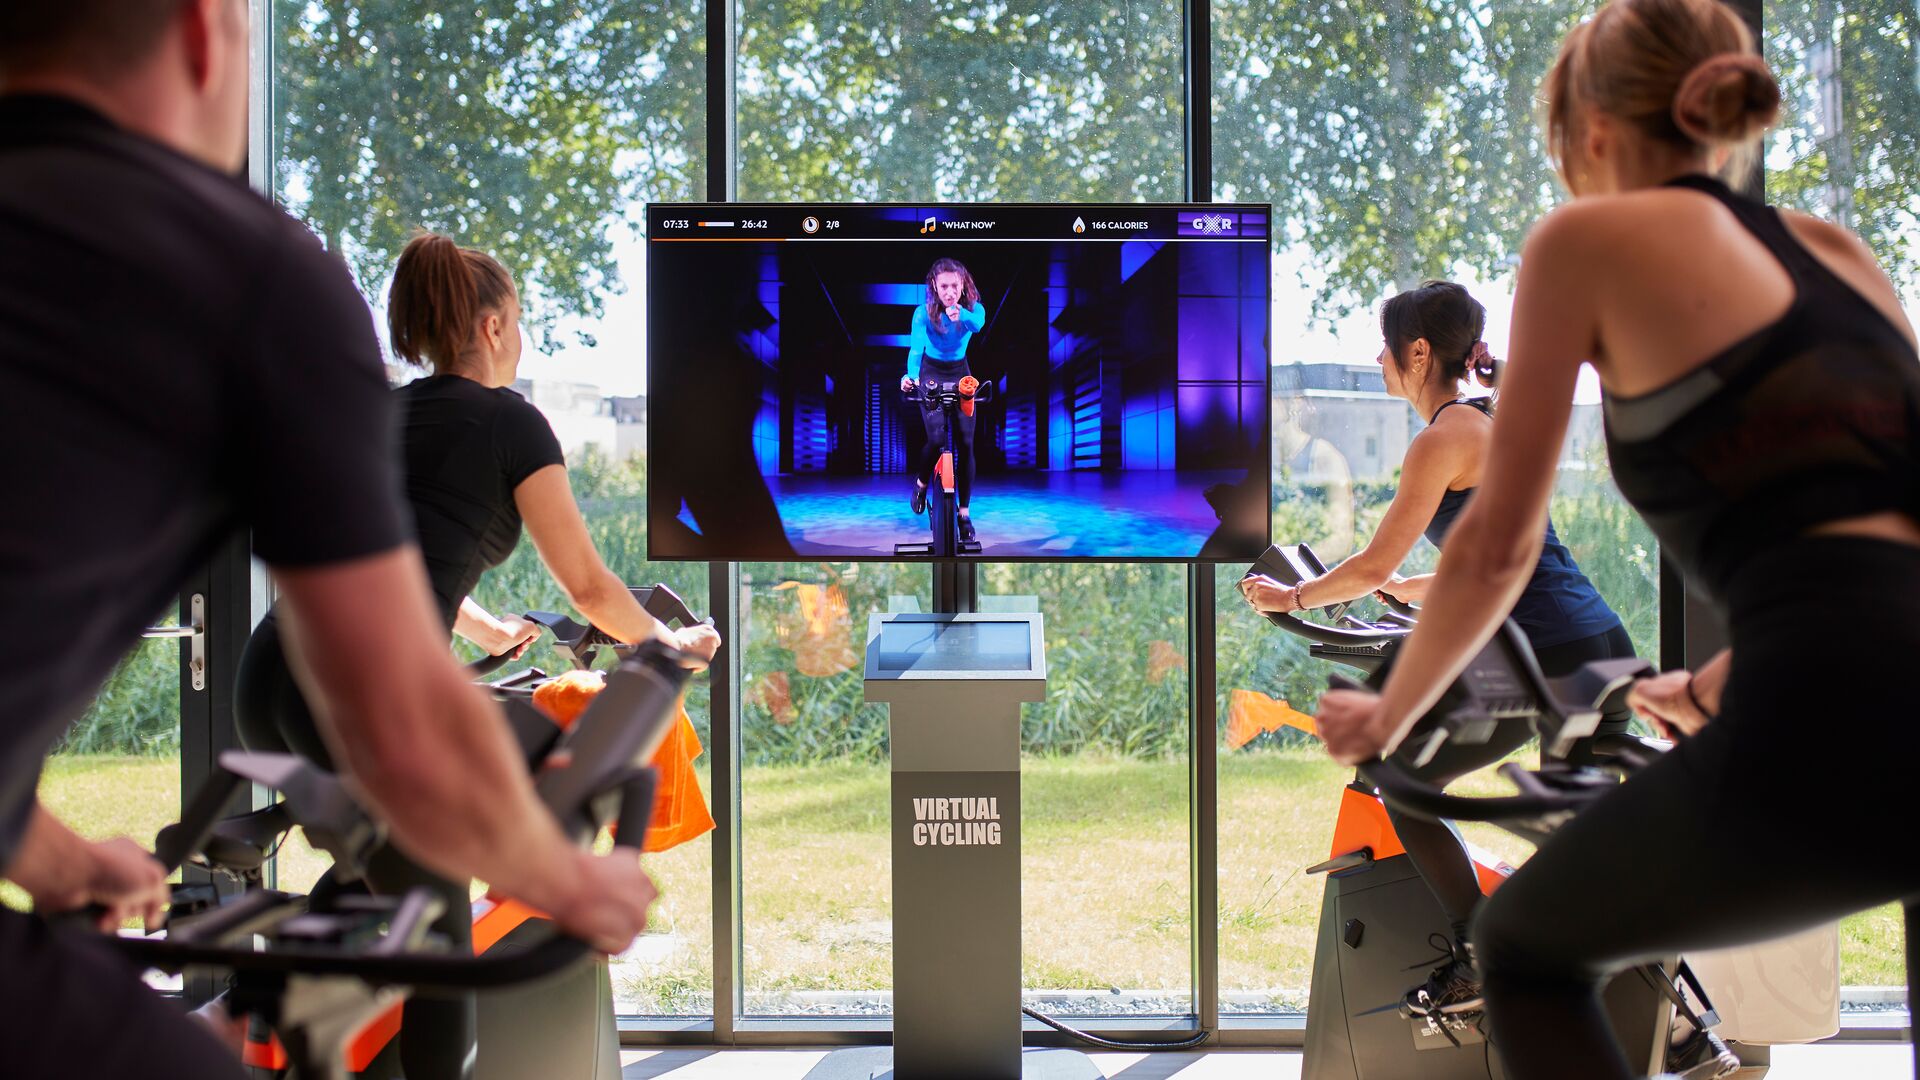 Virtual cycling in the gym